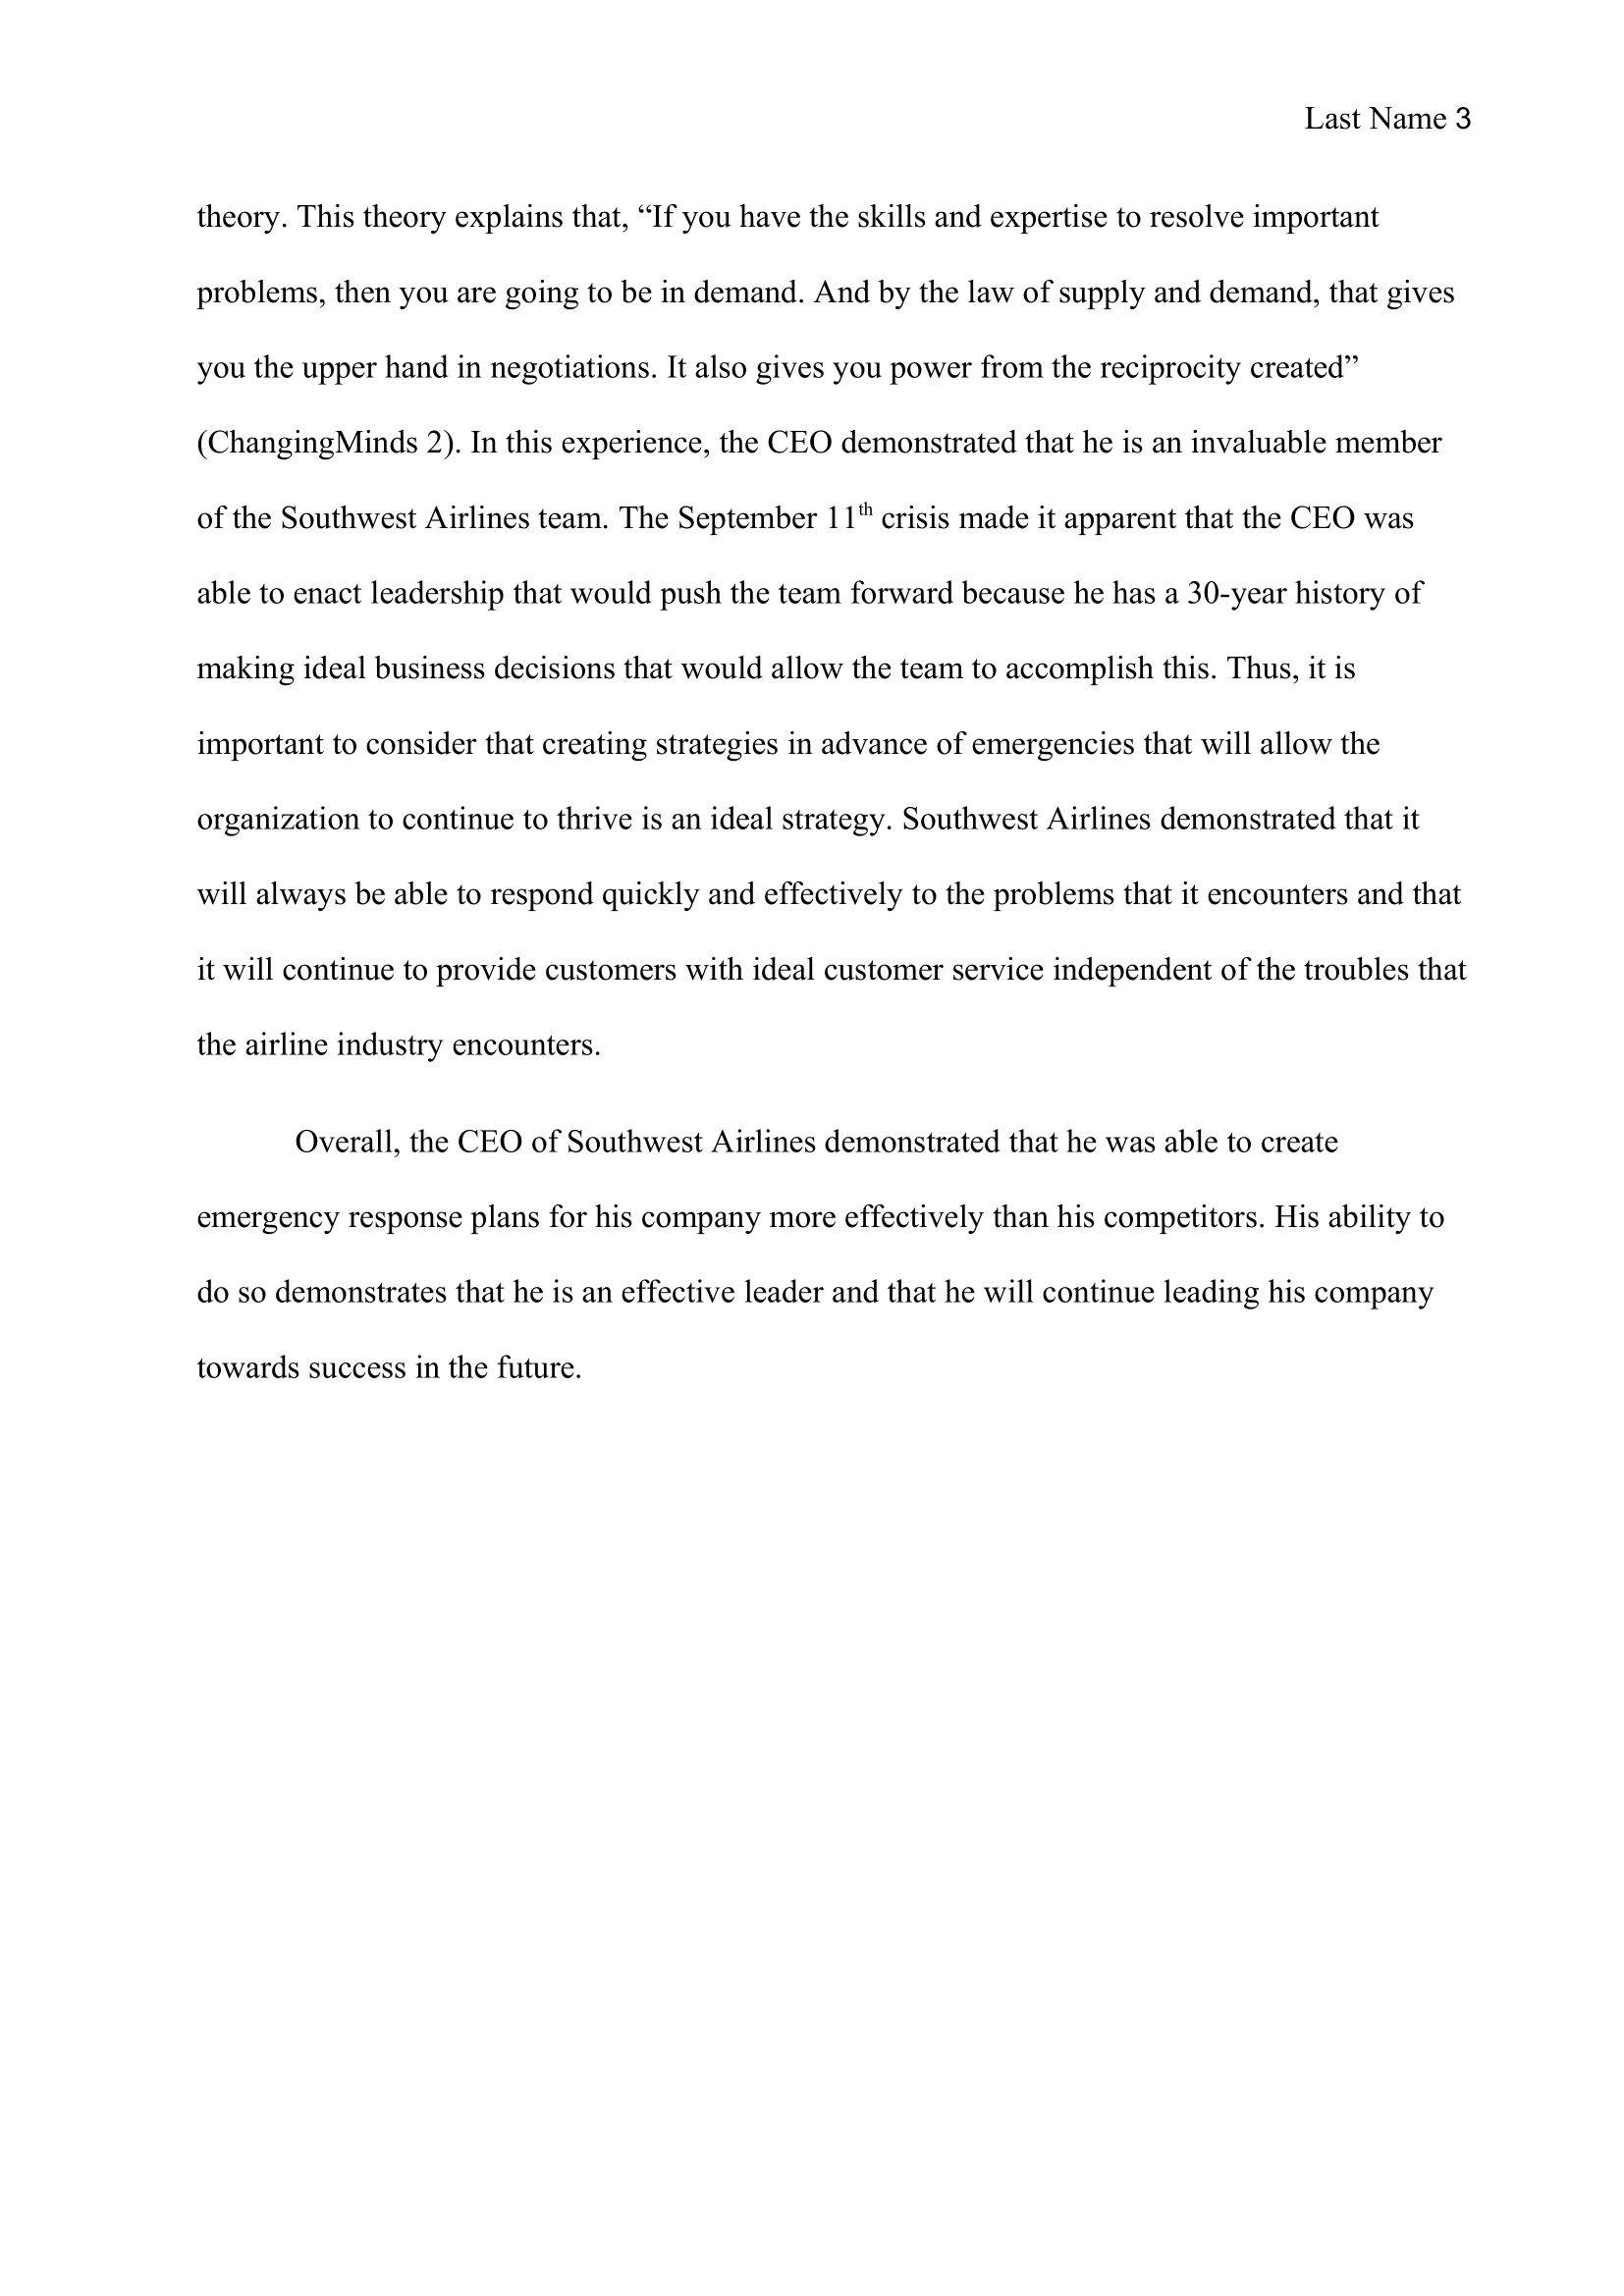 Essay on leadership and management